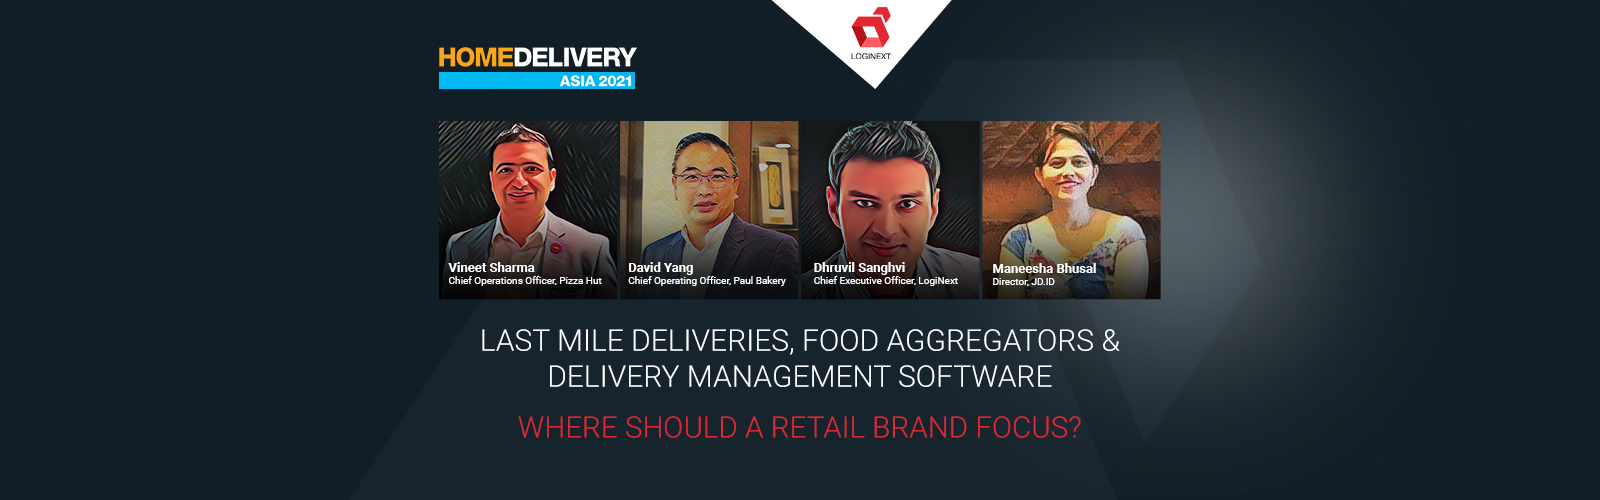 [Video] How can retail brands give a great home delivery experience? #HomeDeliveryAsia